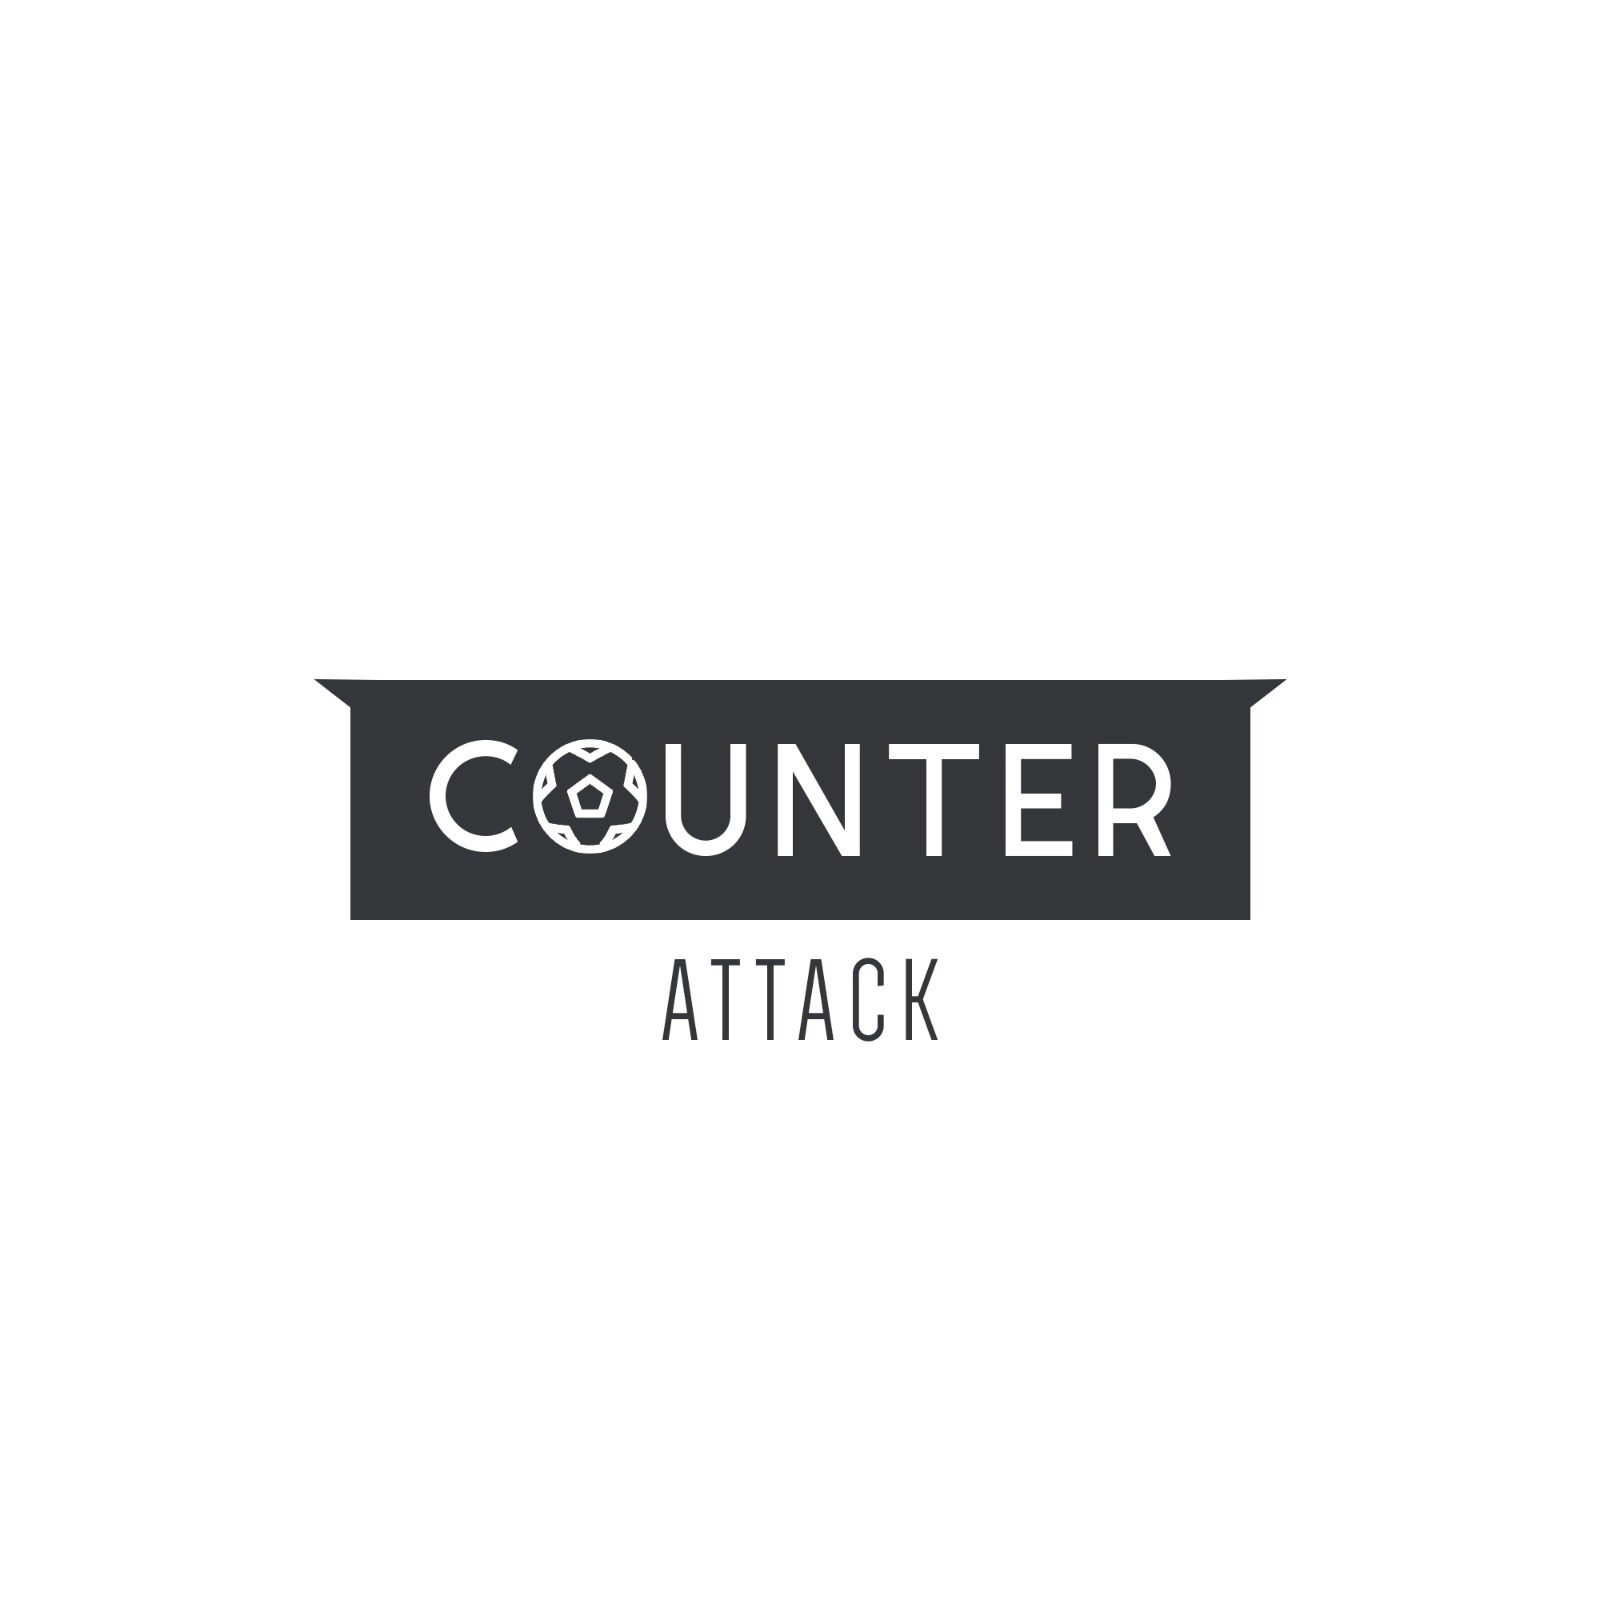 Counter Attack - Episode 125 - Josh Magennis Tries To Makes Sense Of It All